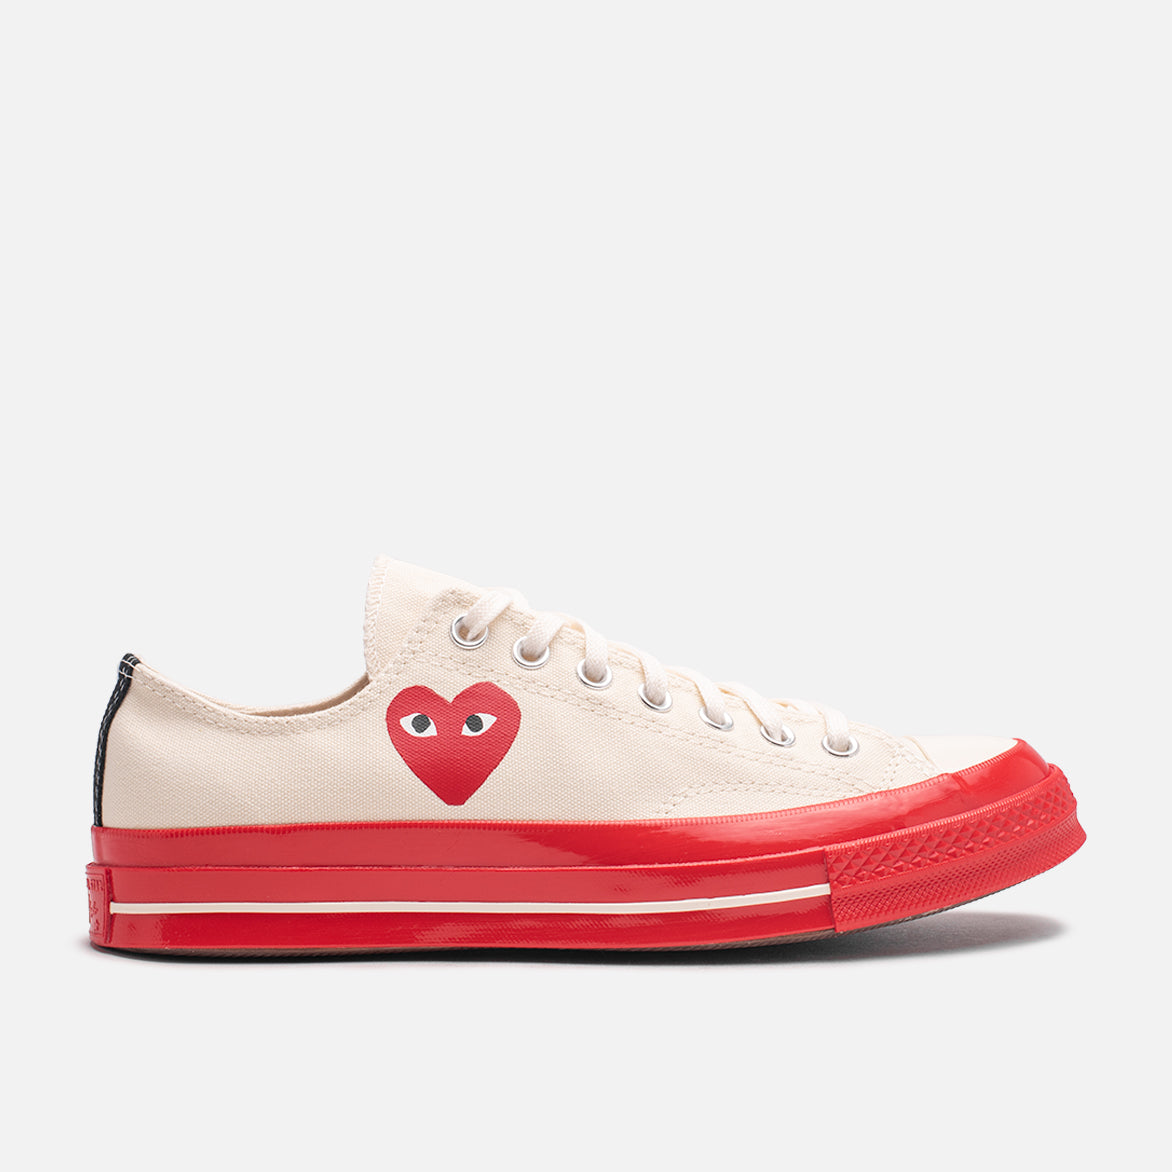 CDG PLAY CONVERSE CHUCK 70 OX PRISTINE / RED | lapstoneandhammer.com